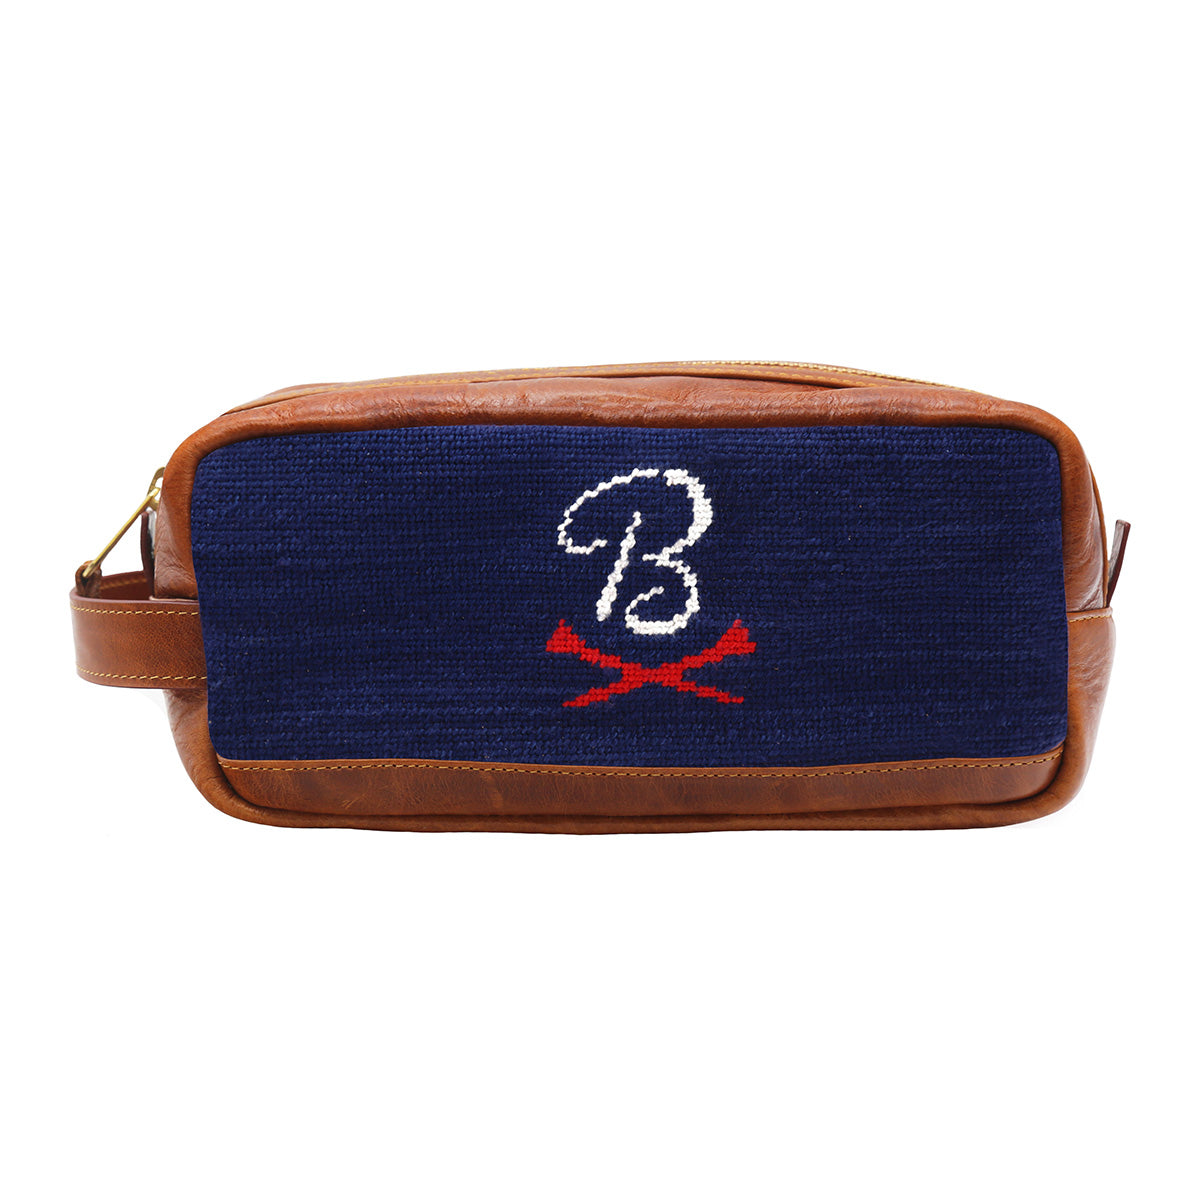 Smathers & Branson x Barstool Golf Crossed Tees Toiletry Bag-Golf Accessories-Fore Play-Navy-One Size-Barstool Sports